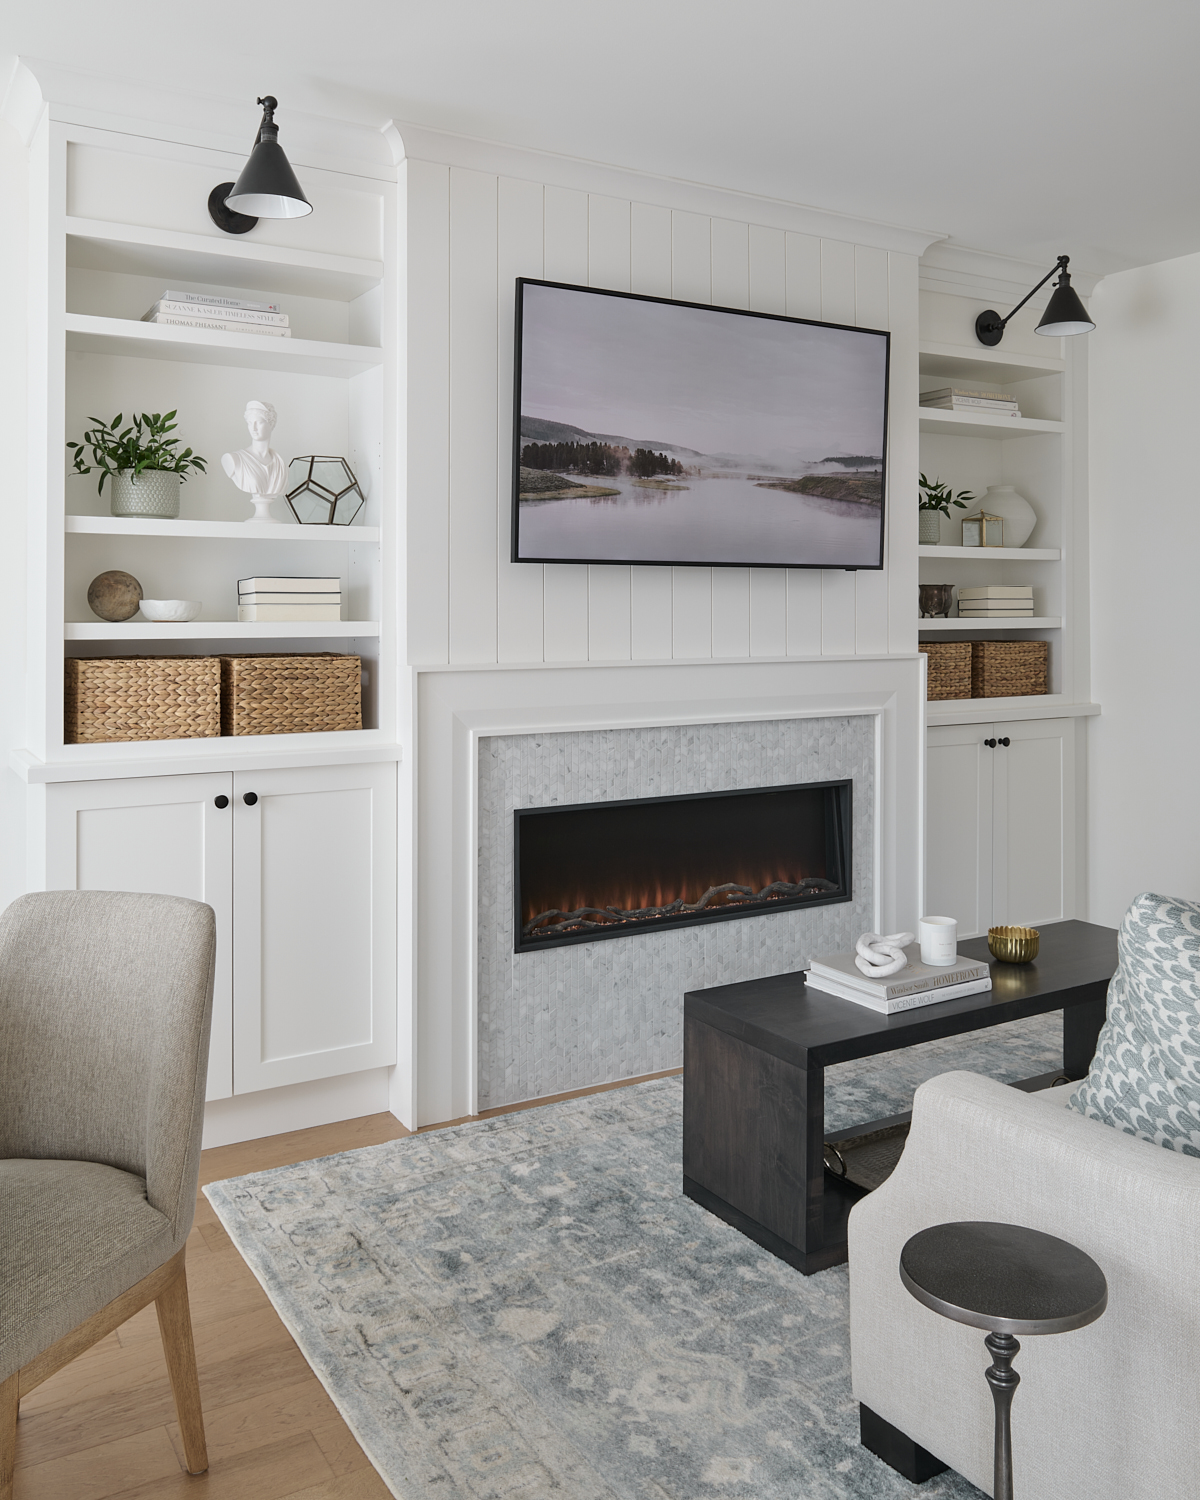 living room wall with fireplace and custom cabinetry styled beautifully with a mix of stylish accessories